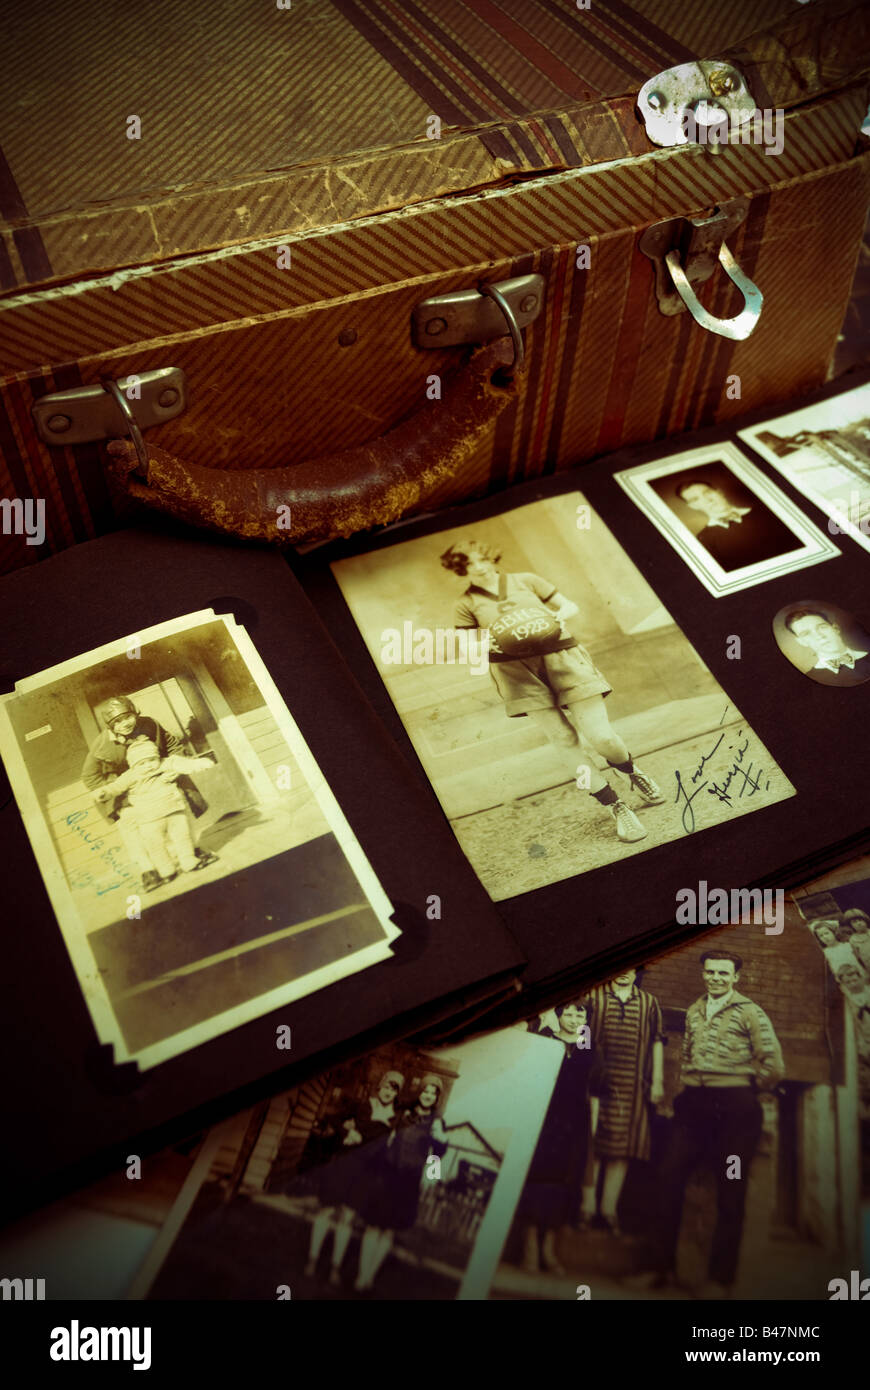 A battered old antique suitcase with vintage photographs from an old photo album. Stock Photo